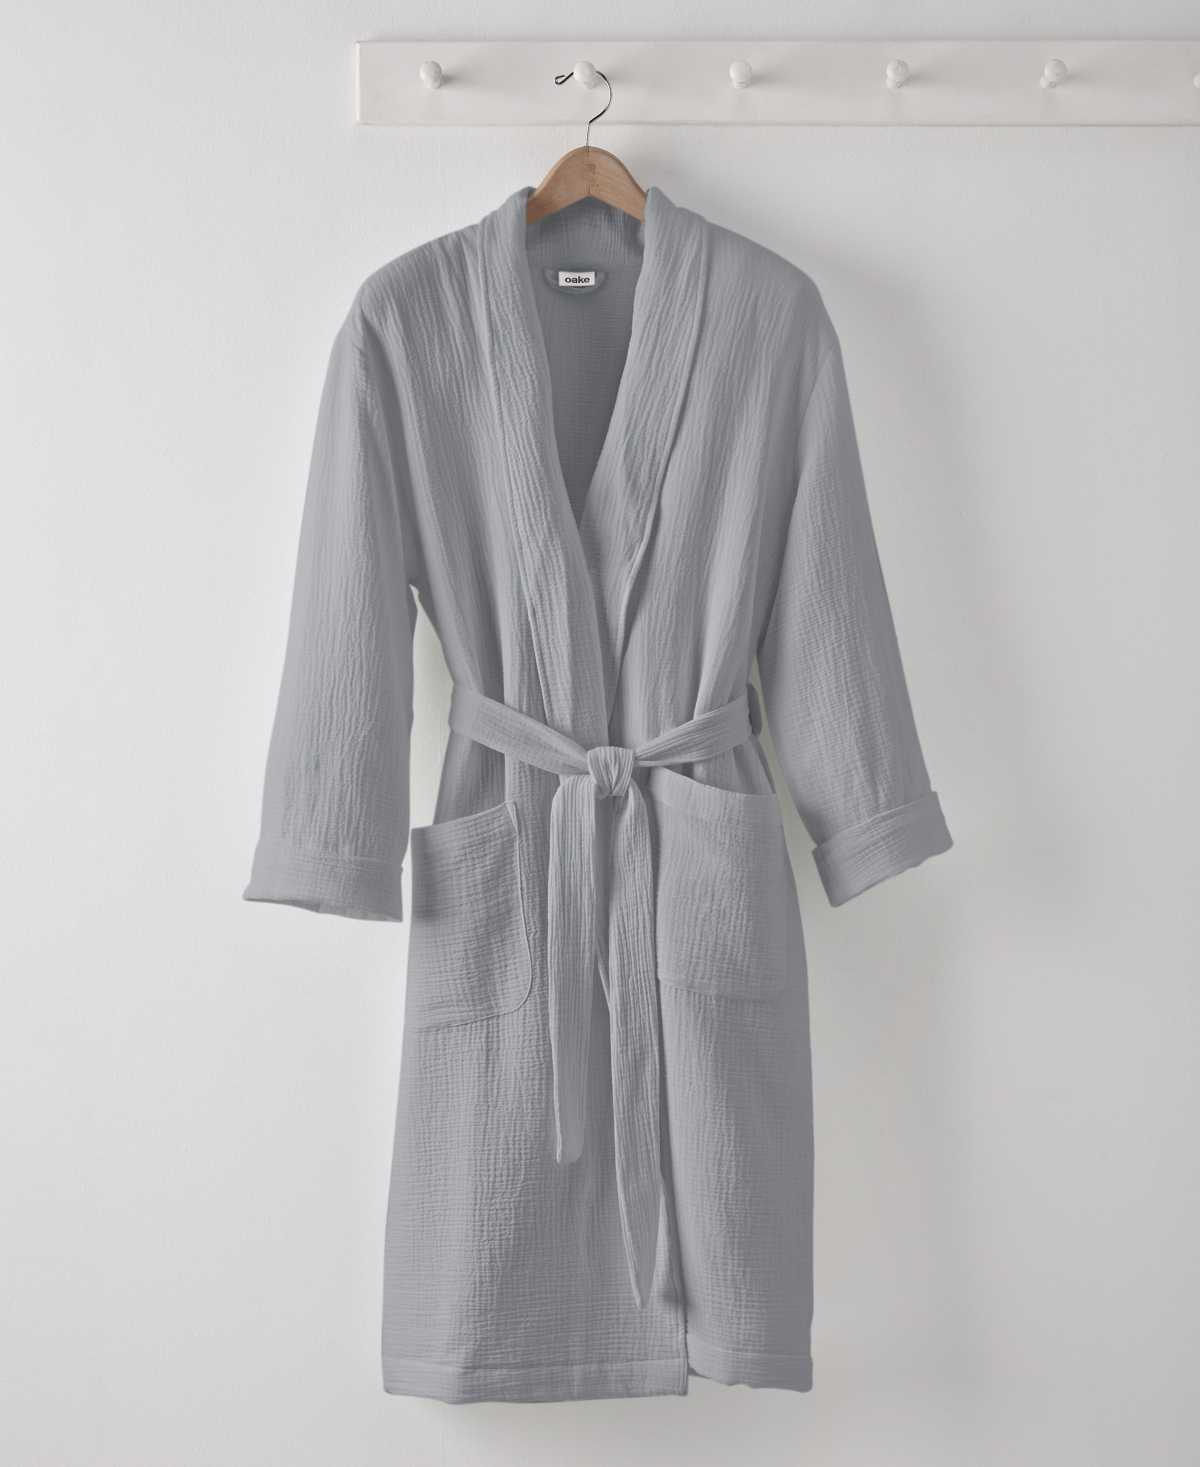 All Cotton Lightweight Gauze Robe, Created for Macy's - Charcoal